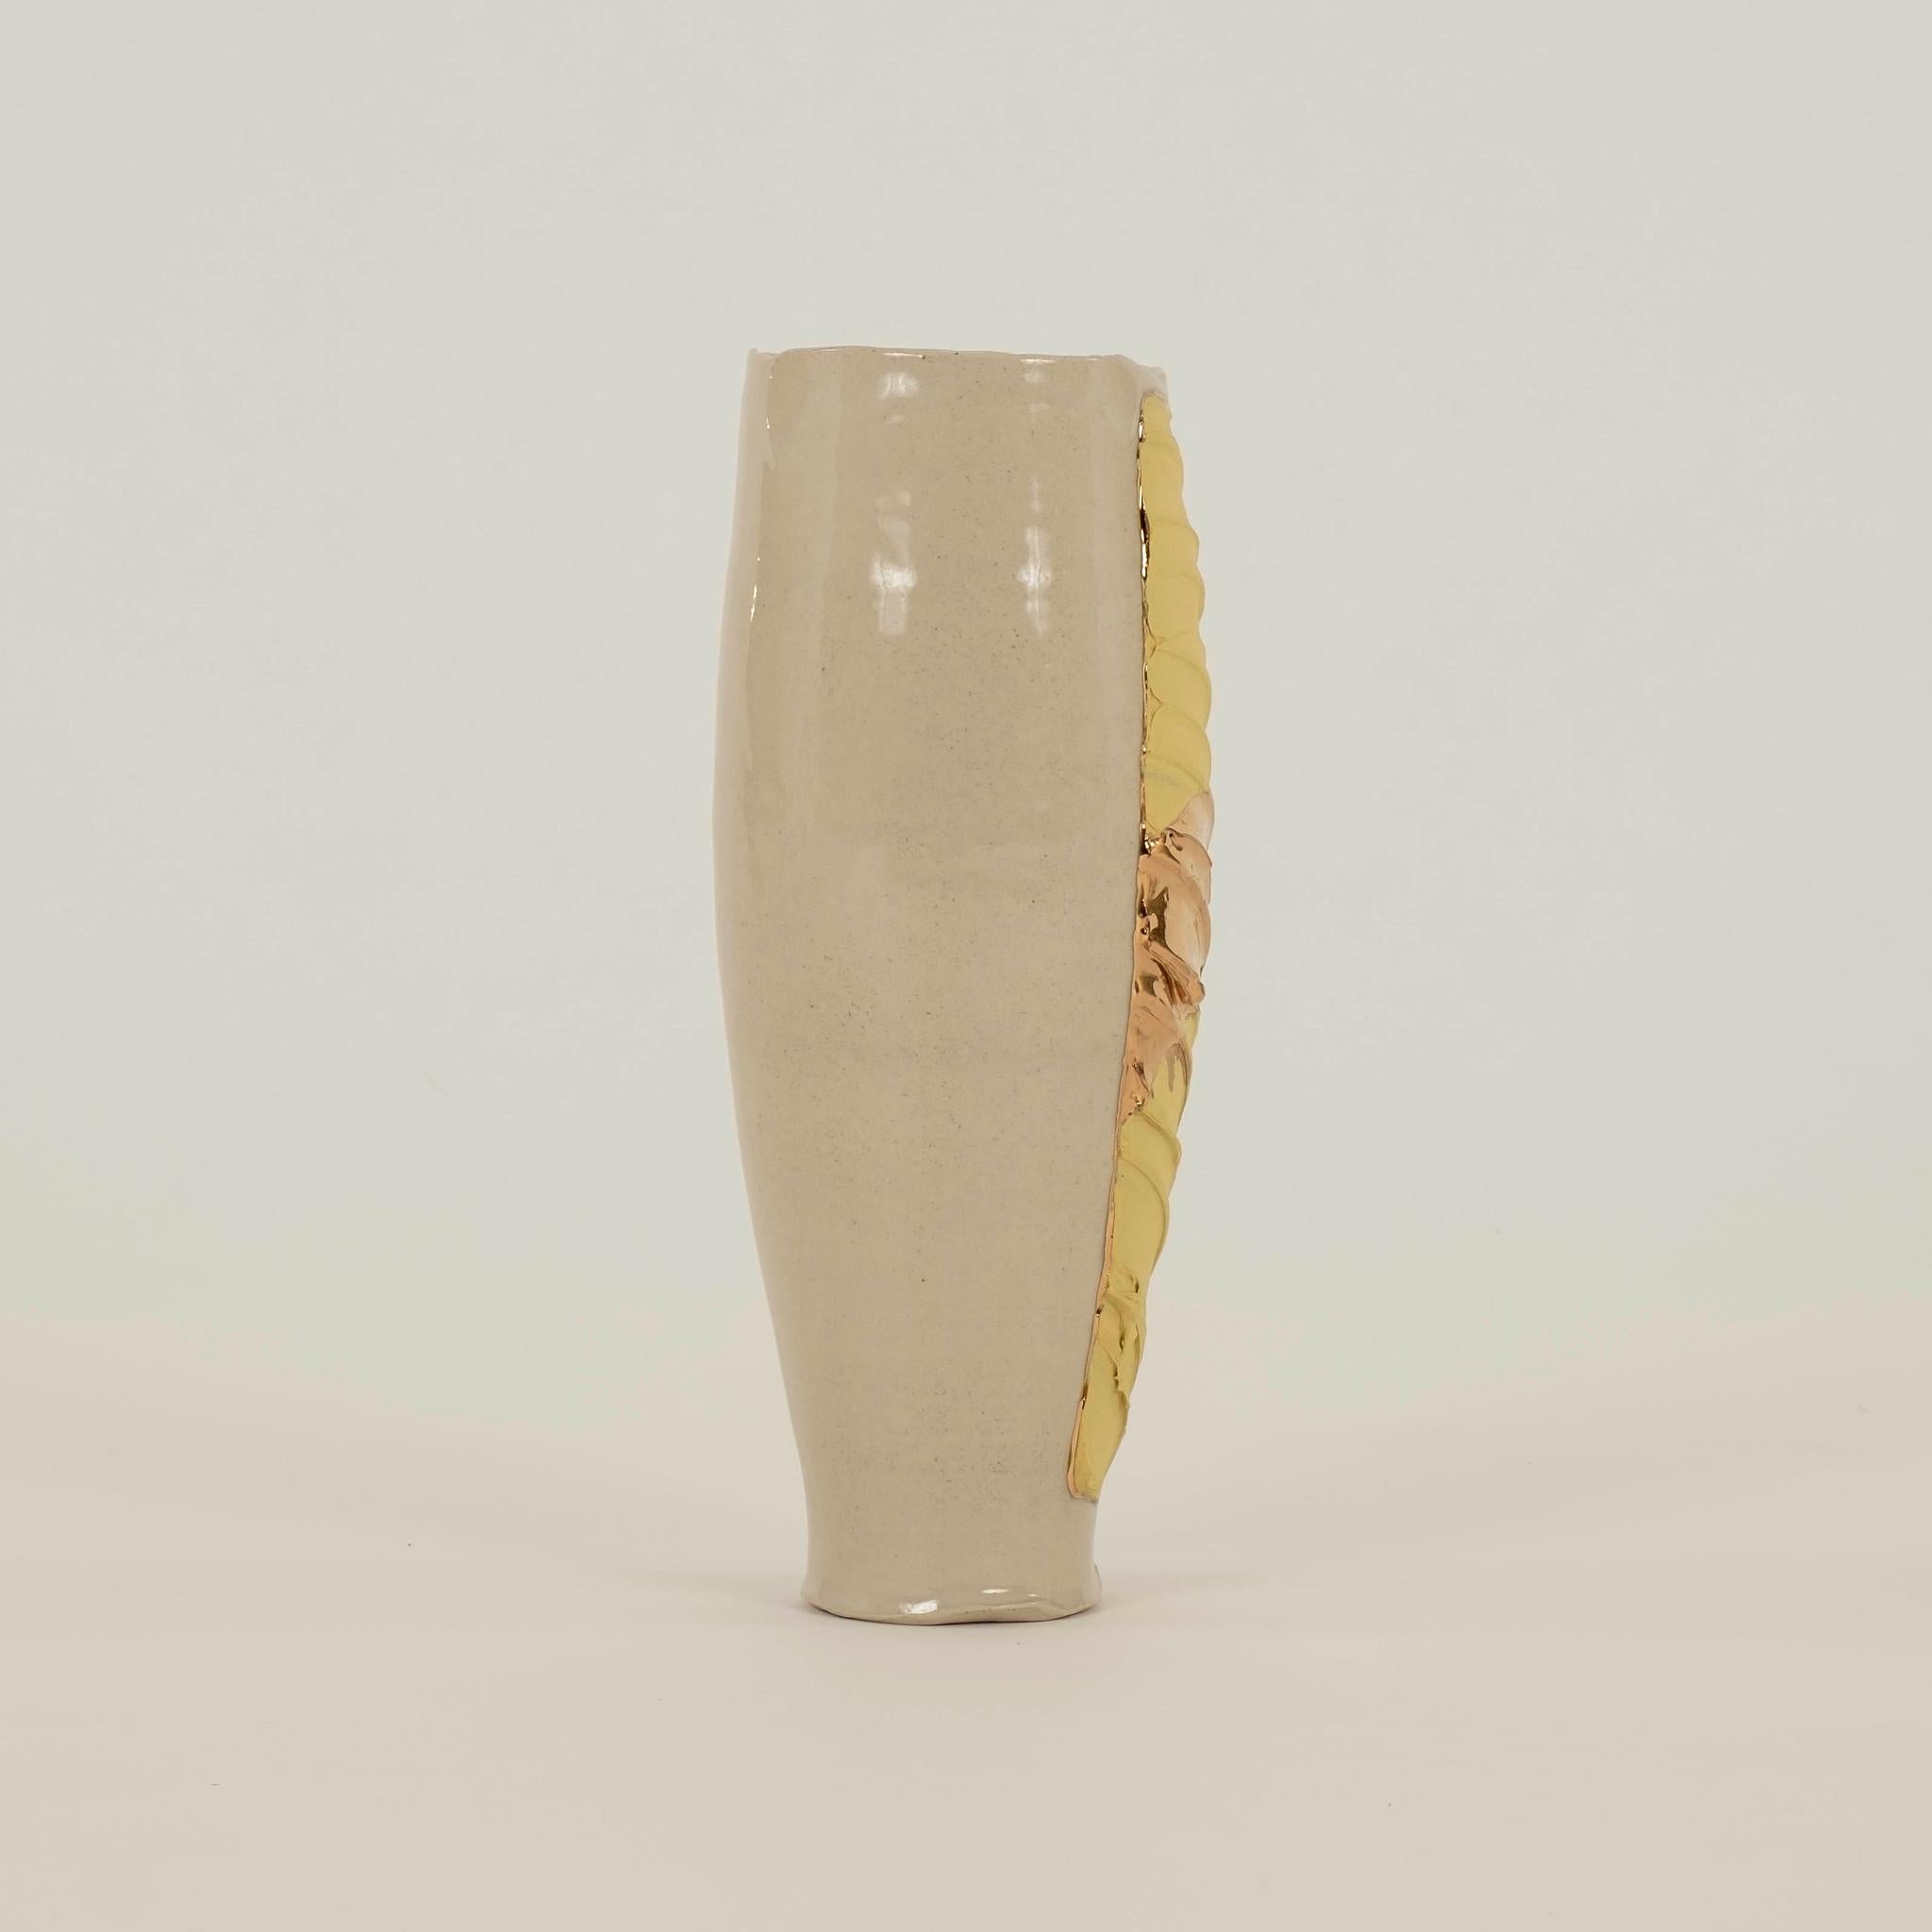 Hand thrown porcelain vase with polychrome and 24K fire gilt accents.
North America, 21st C
Chase Gamblin

Chase Gamblin is an artist primarily working in ceramics. Currently, he is an Academic Specialist and Studio Coordinator for the Ceramics